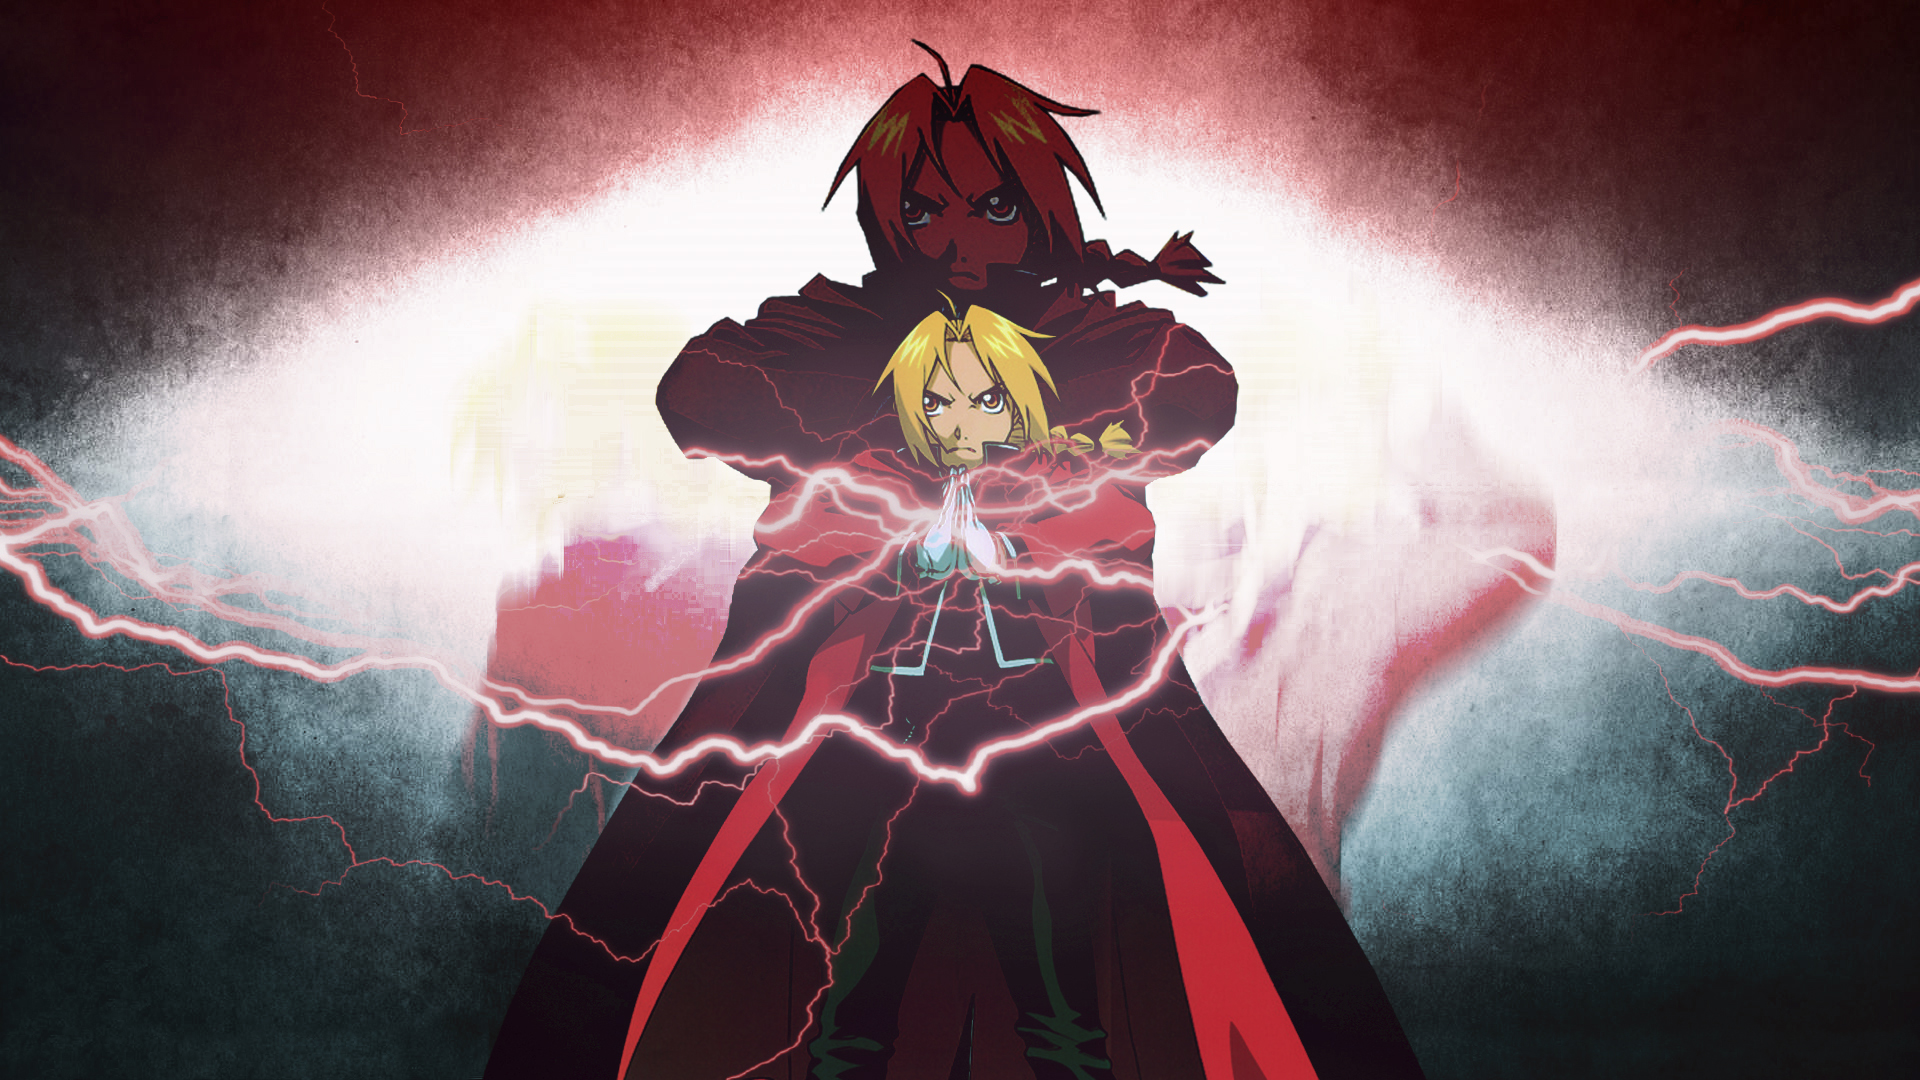 Edward Elric Backgrounds Download 1920x1080